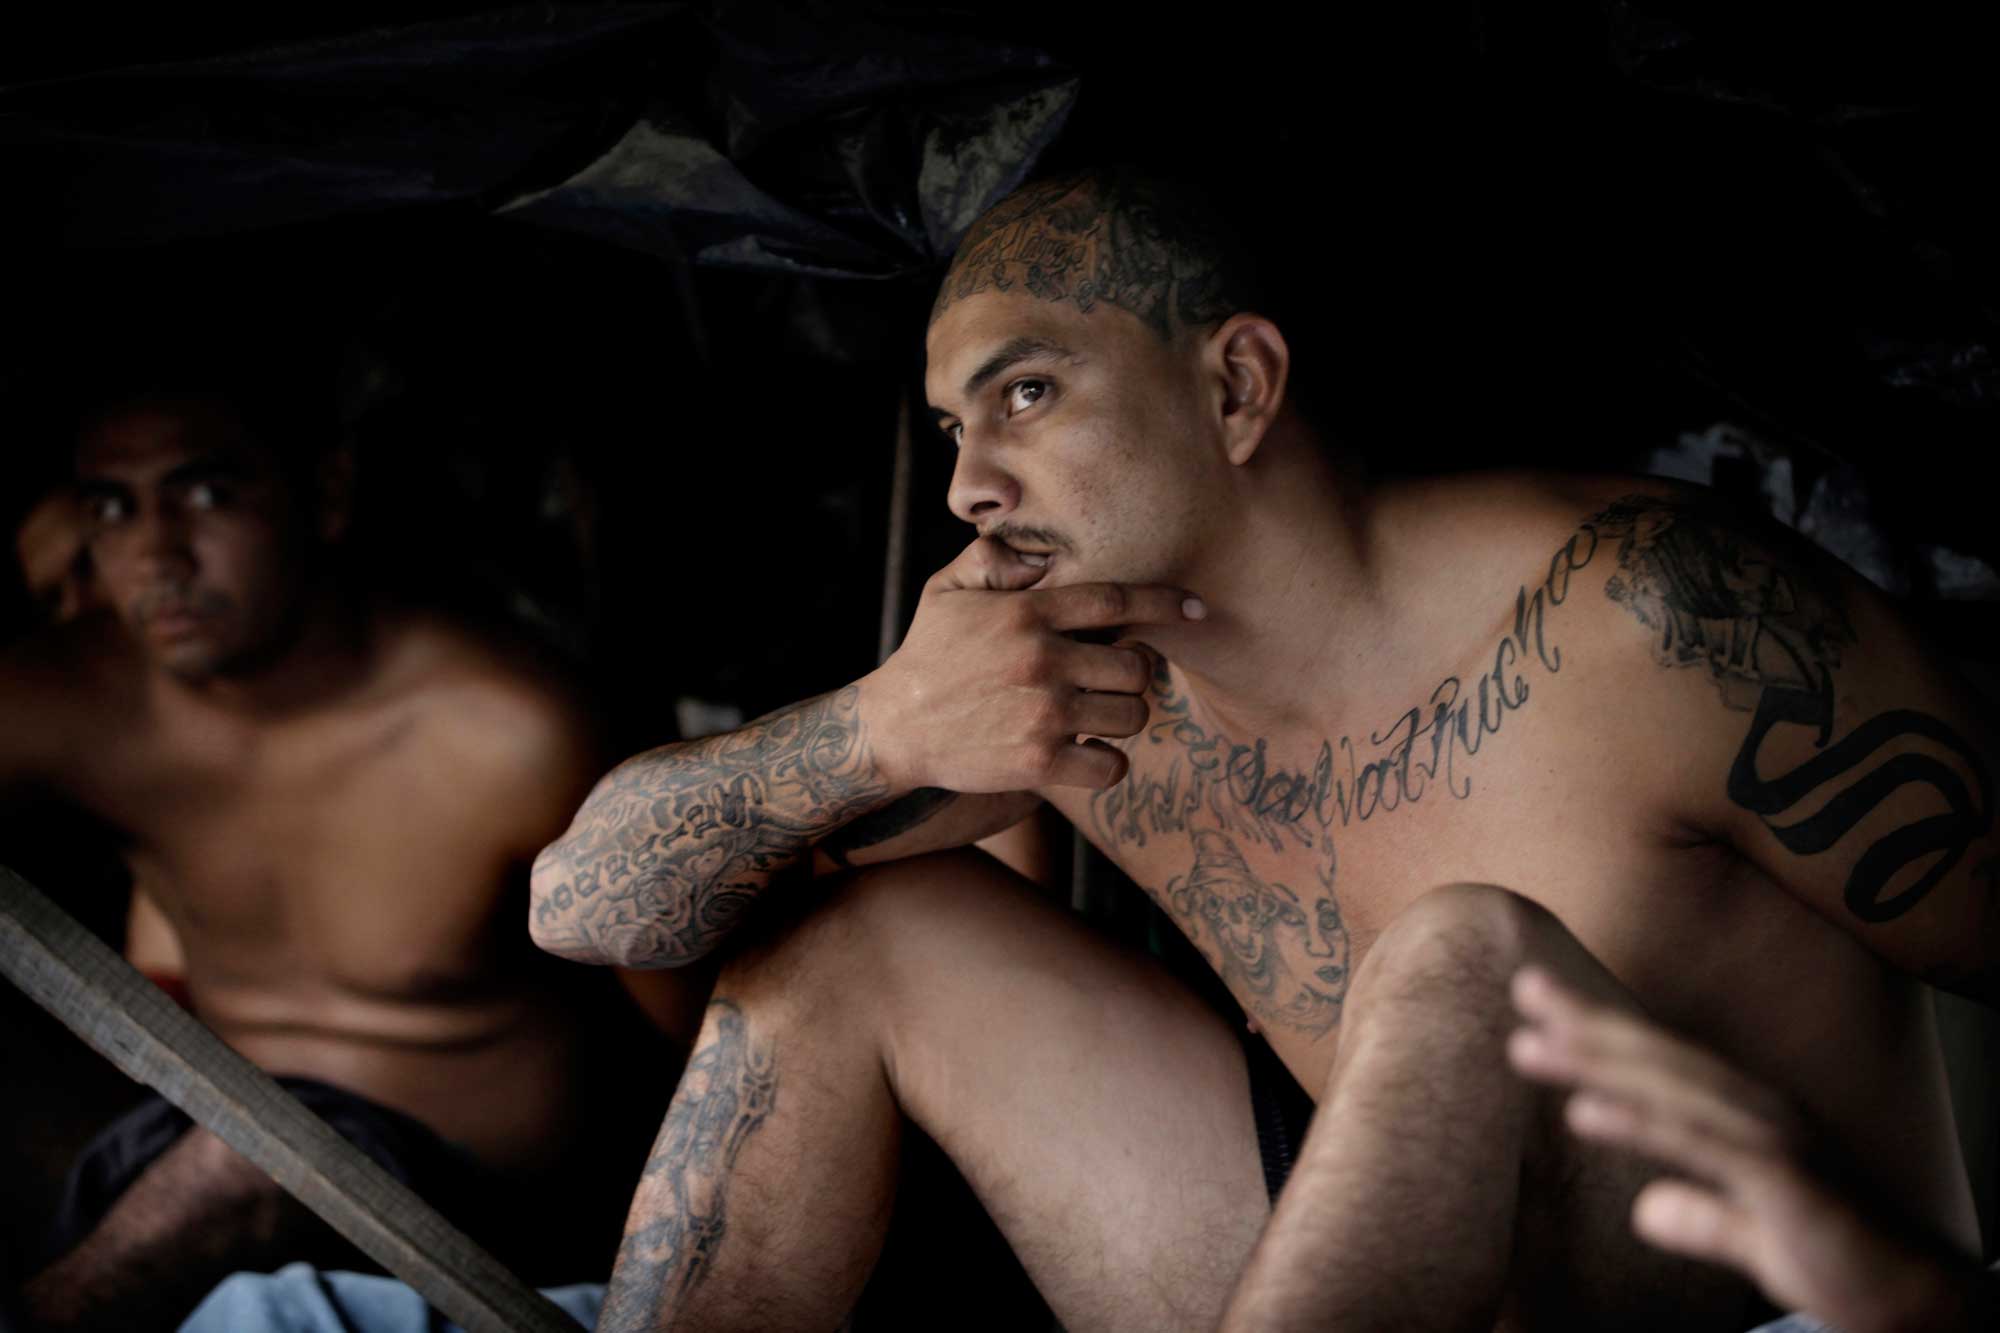 A members of the Mara Salvatrucha, or MS13, a transnational criminal gang which originated on the streets of Los Angeles along with its main rival, the Barrio 18 gang. El Salvador has seen escalating crime rates that is rapidly making the country the deadliest place in the world.